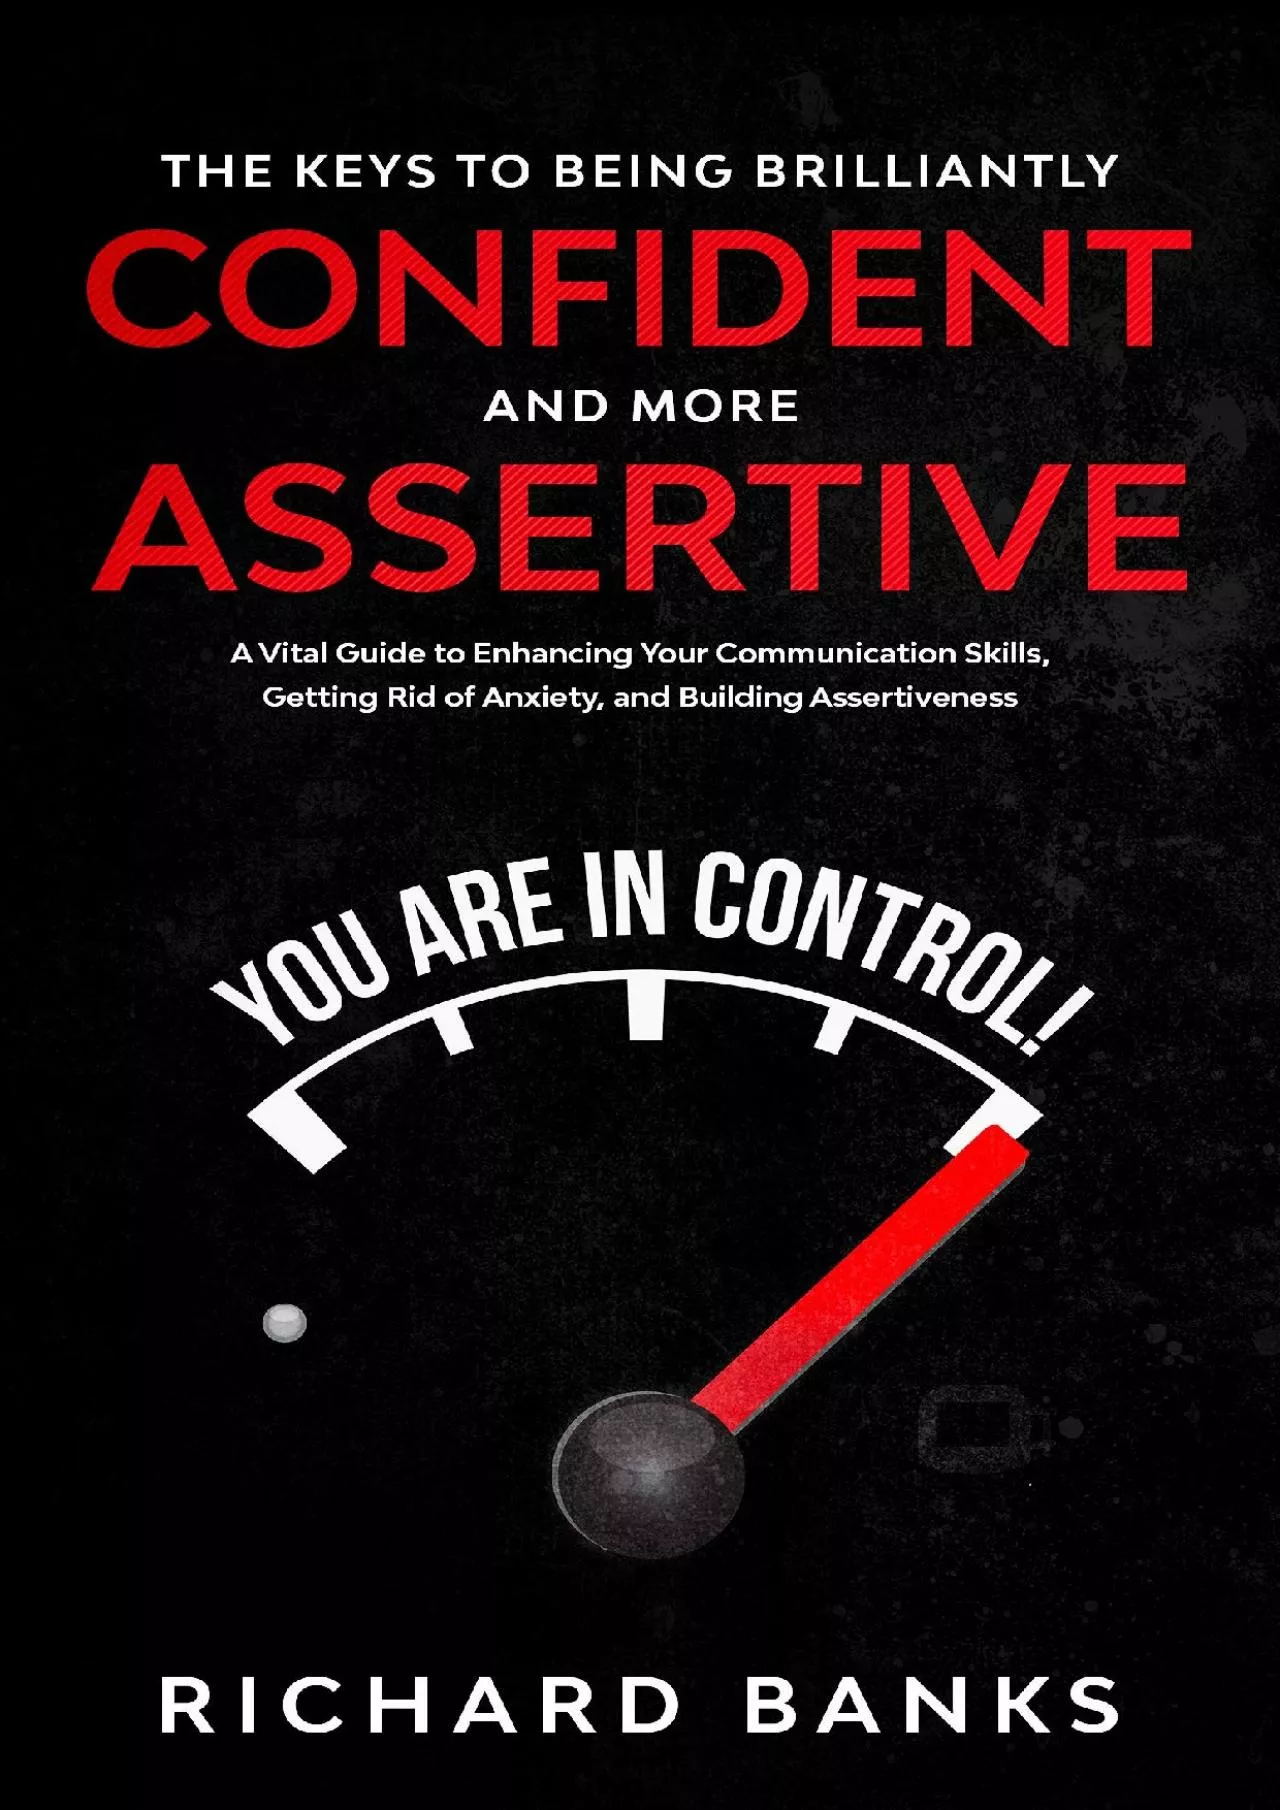 [DOWNLOAD] The Keys to Being Brilliantly Confident and More Assertive: A Vital Guide to